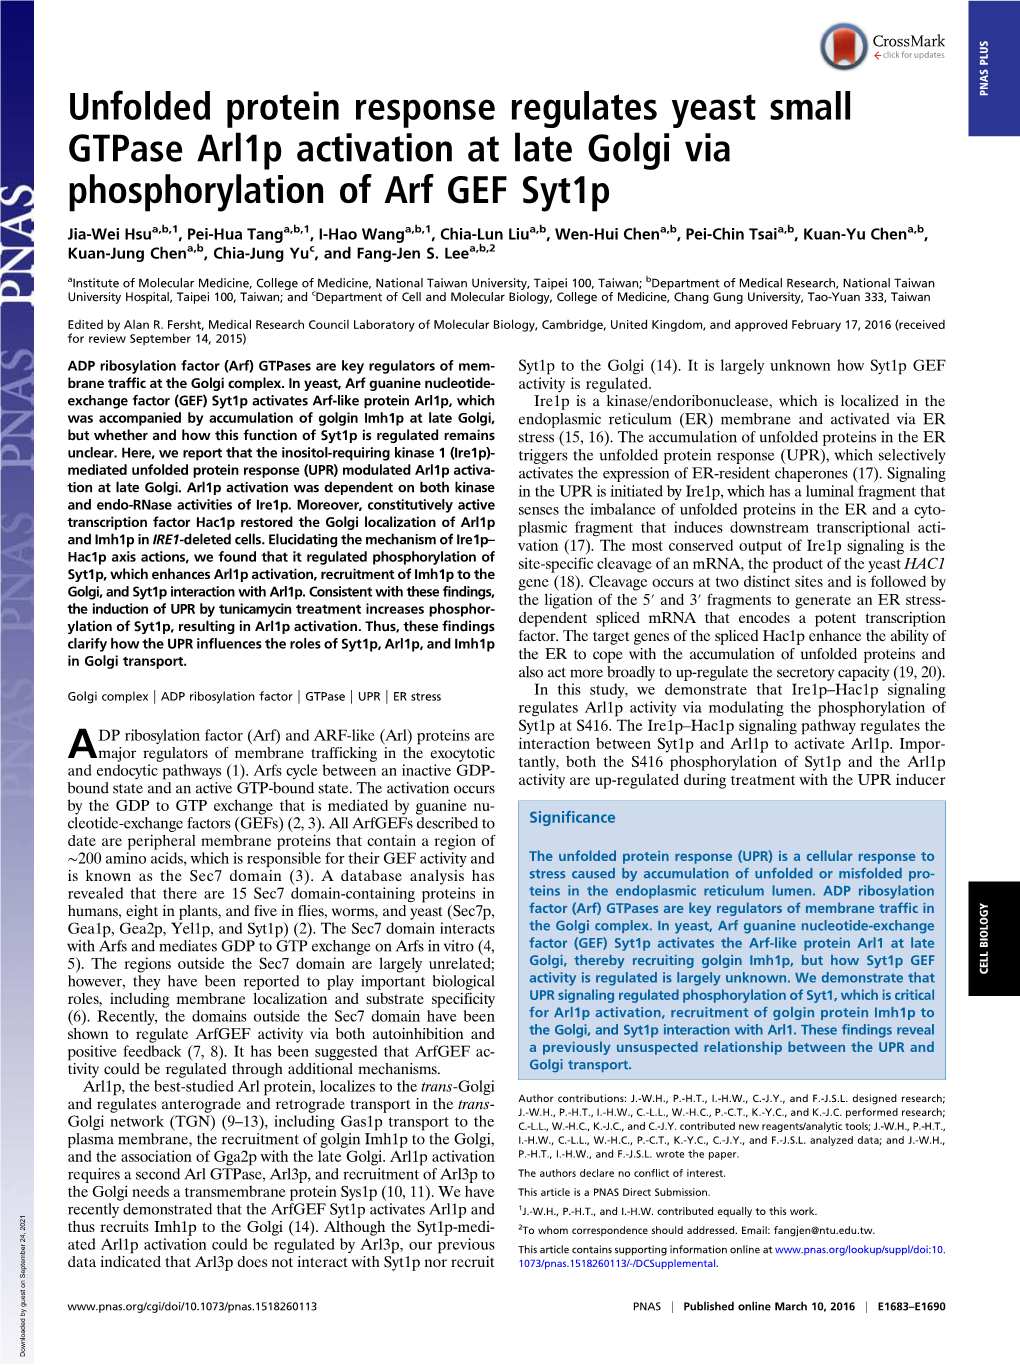 Unfolded Protein Response Regulates Yeast Small Gtpase Arl1p Activation